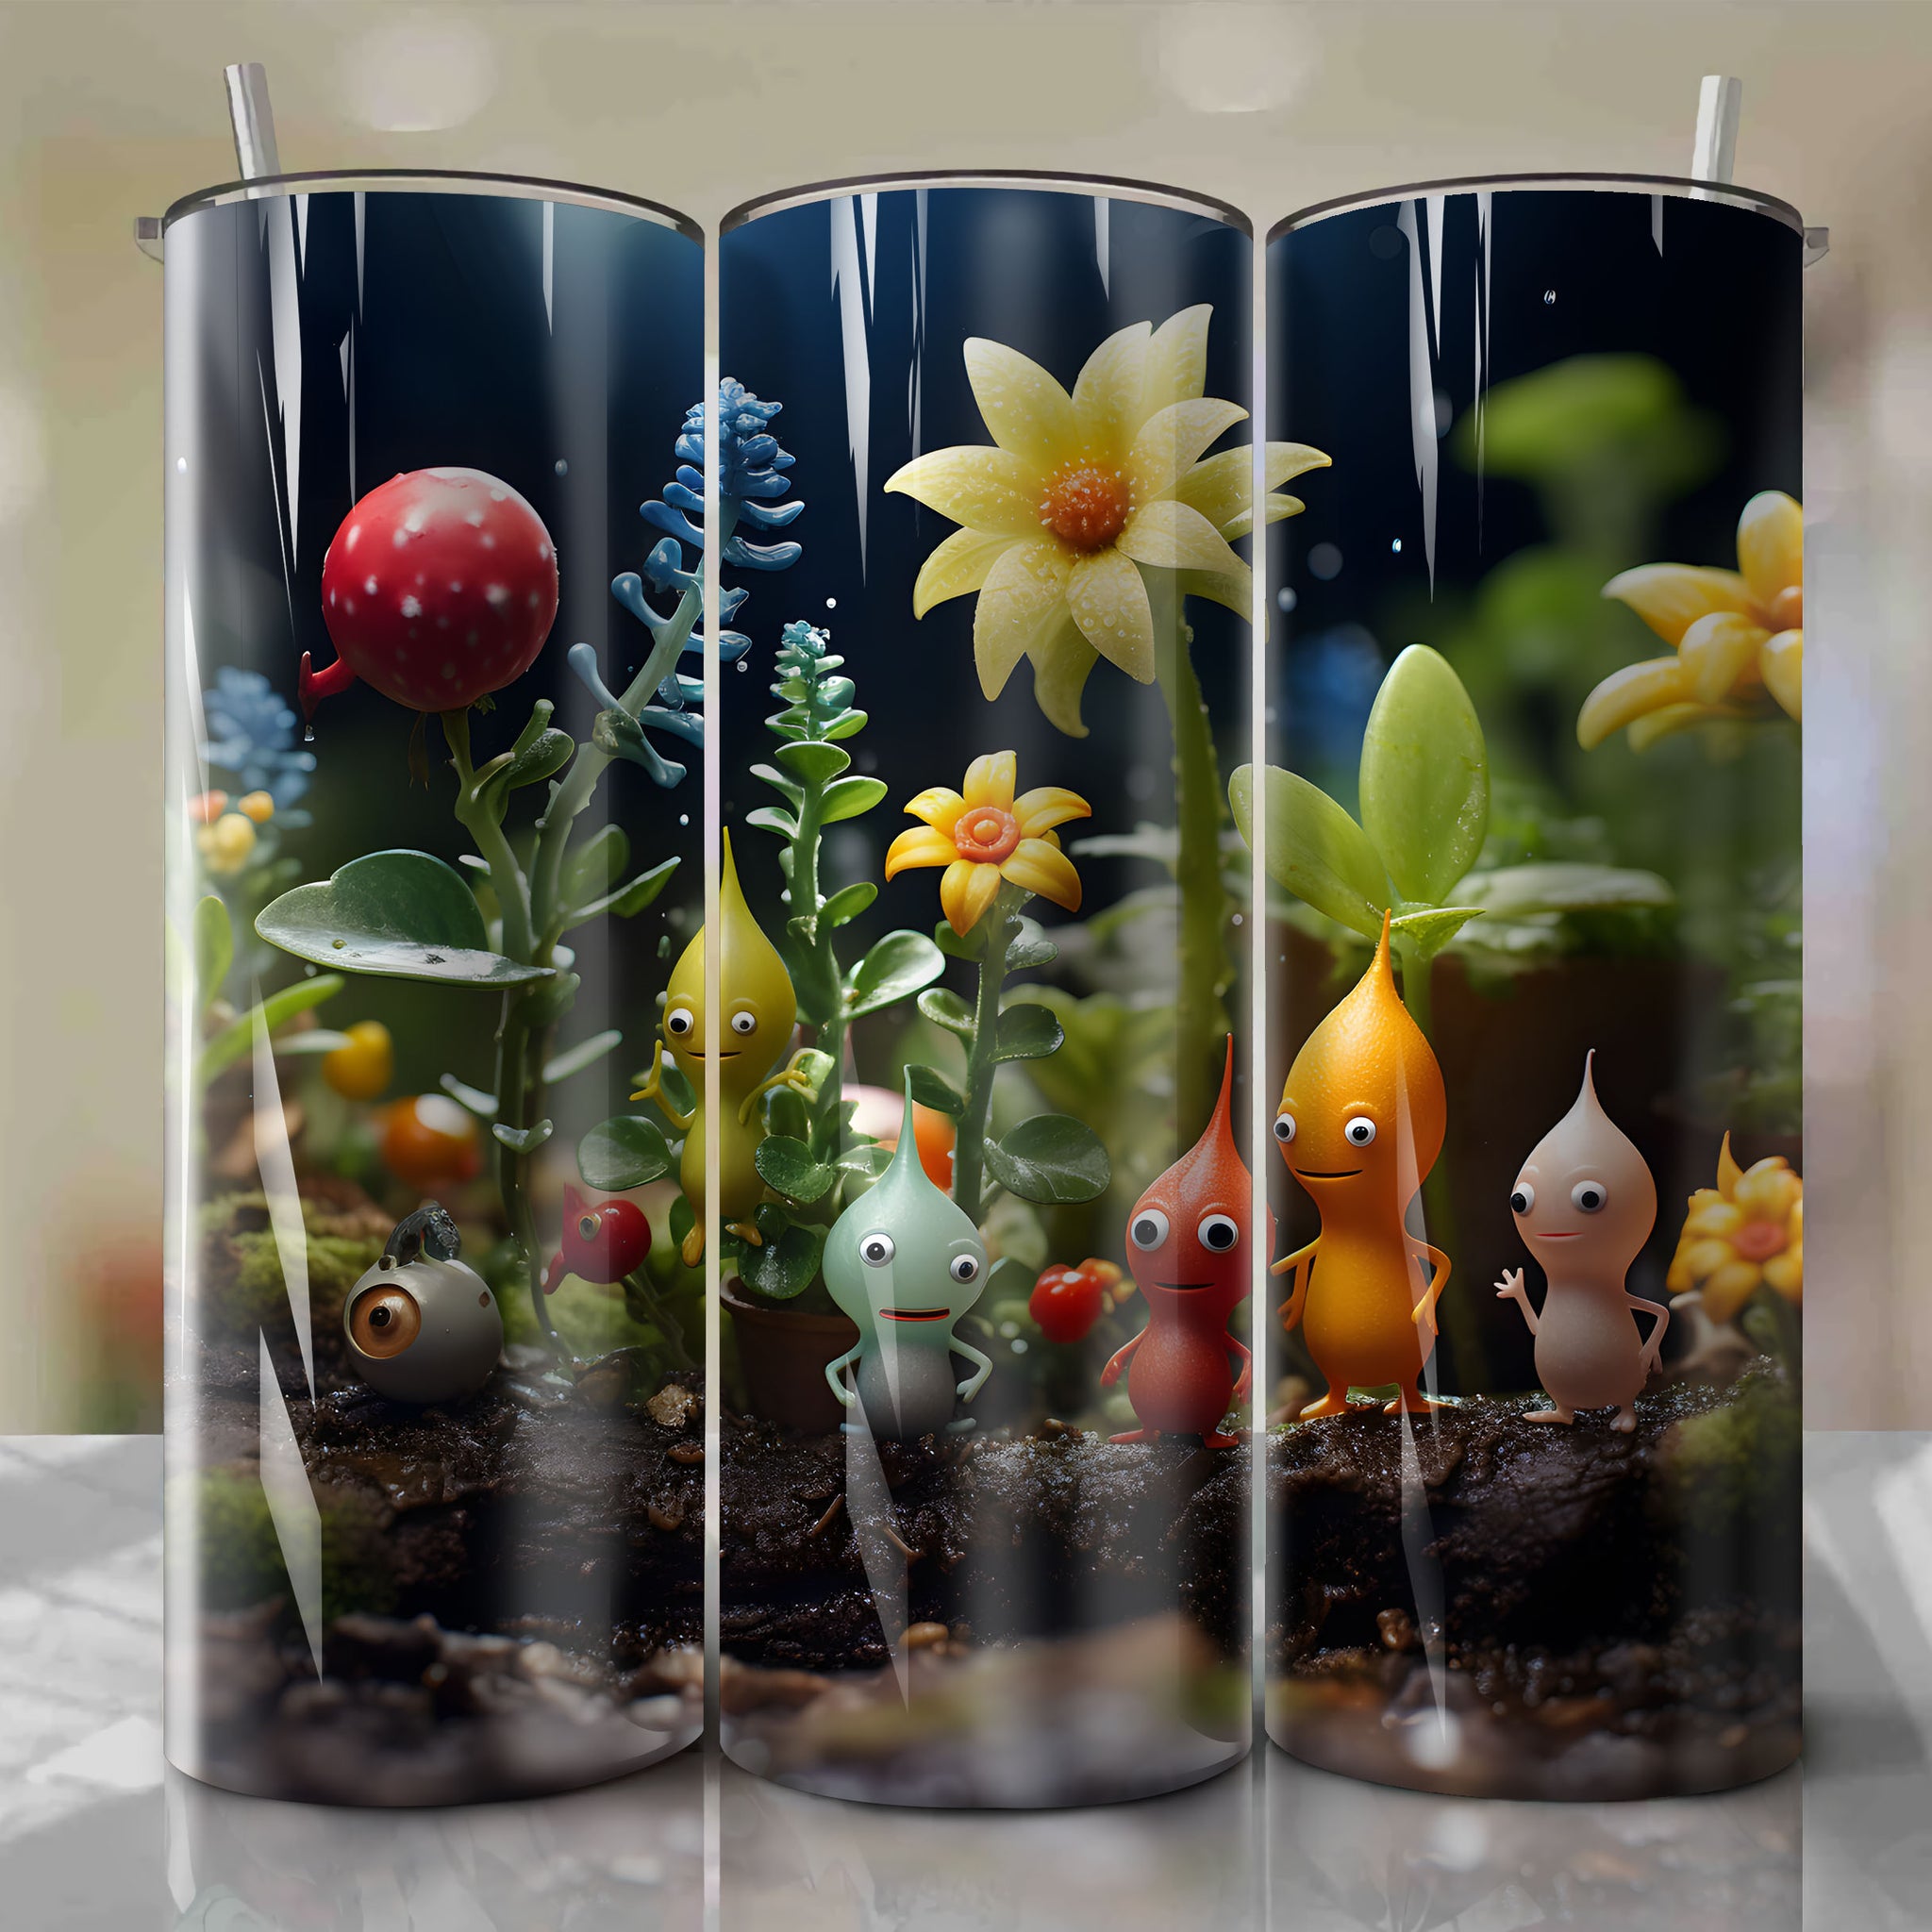 20 Oz Tumbler Wrap - A Delightful Collaboration with Pikmin and Tim Burton for a Heartwarming Artwork
